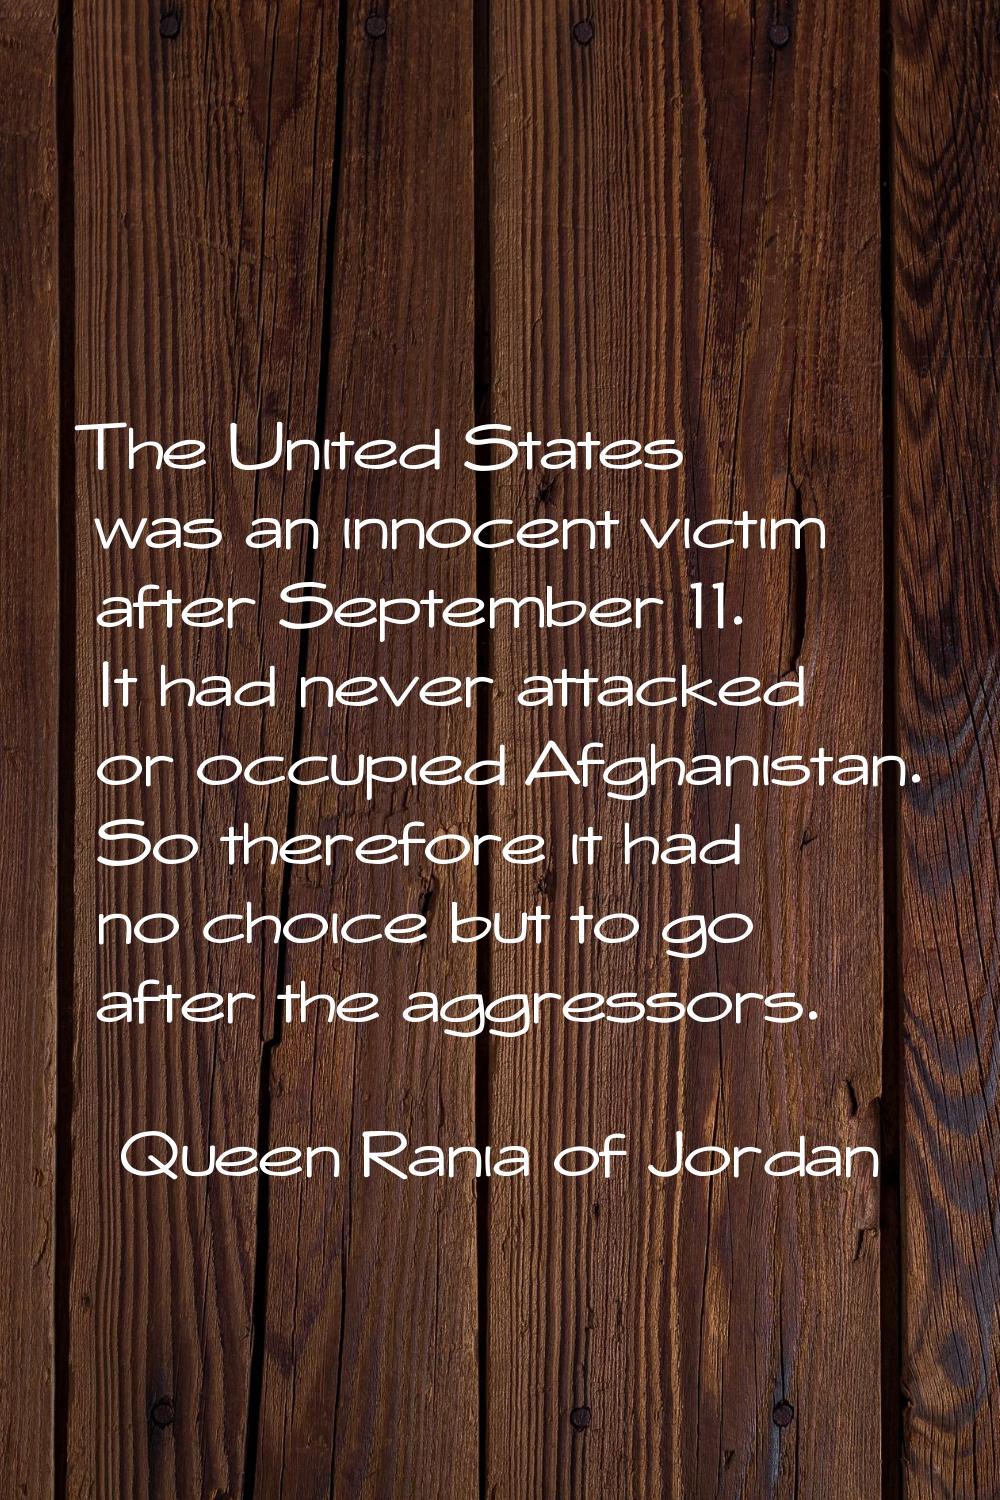 The United States was an innocent victim after September 11. It had never attacked or occupied Afgh